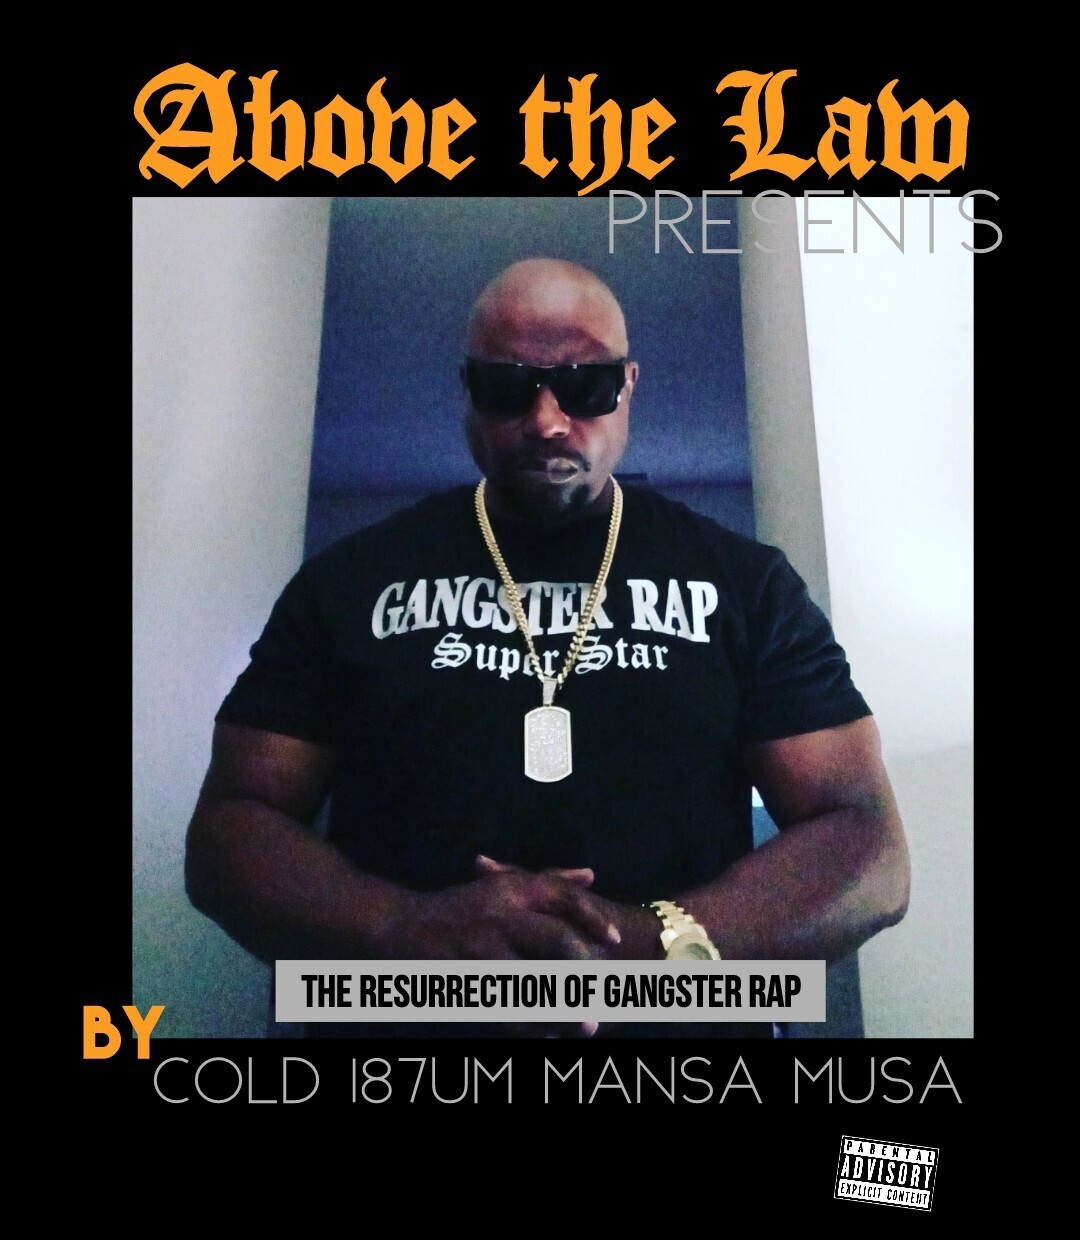 ABOVE THE LAW presents THE RESURRECTION OF GANGSTER RAP
By COLD187UM MANSA MUSA
Domestic Release